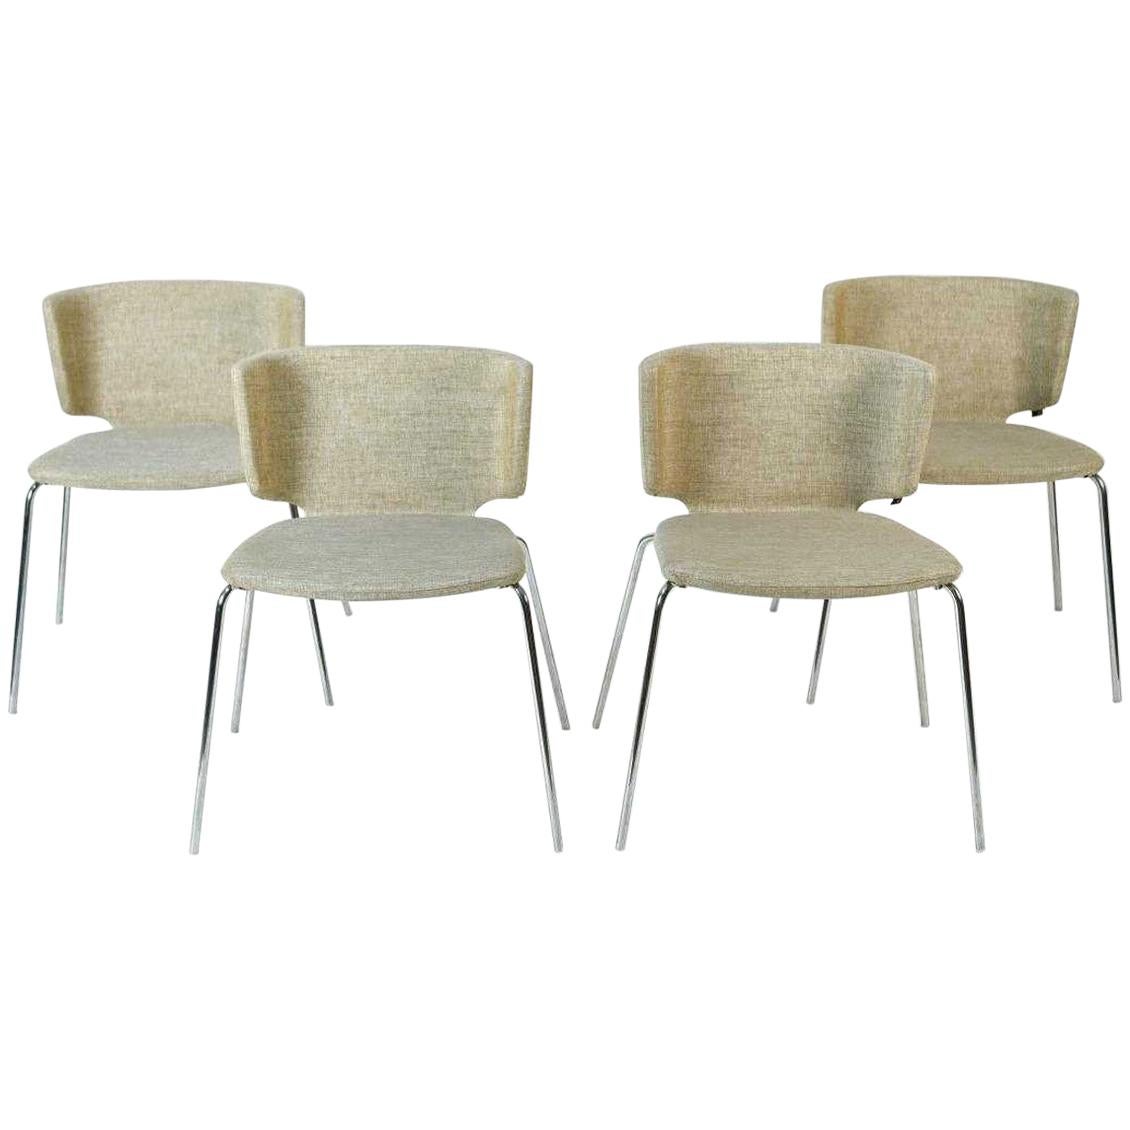 Four Steelcase Coalesse Wrapp Side Chairs